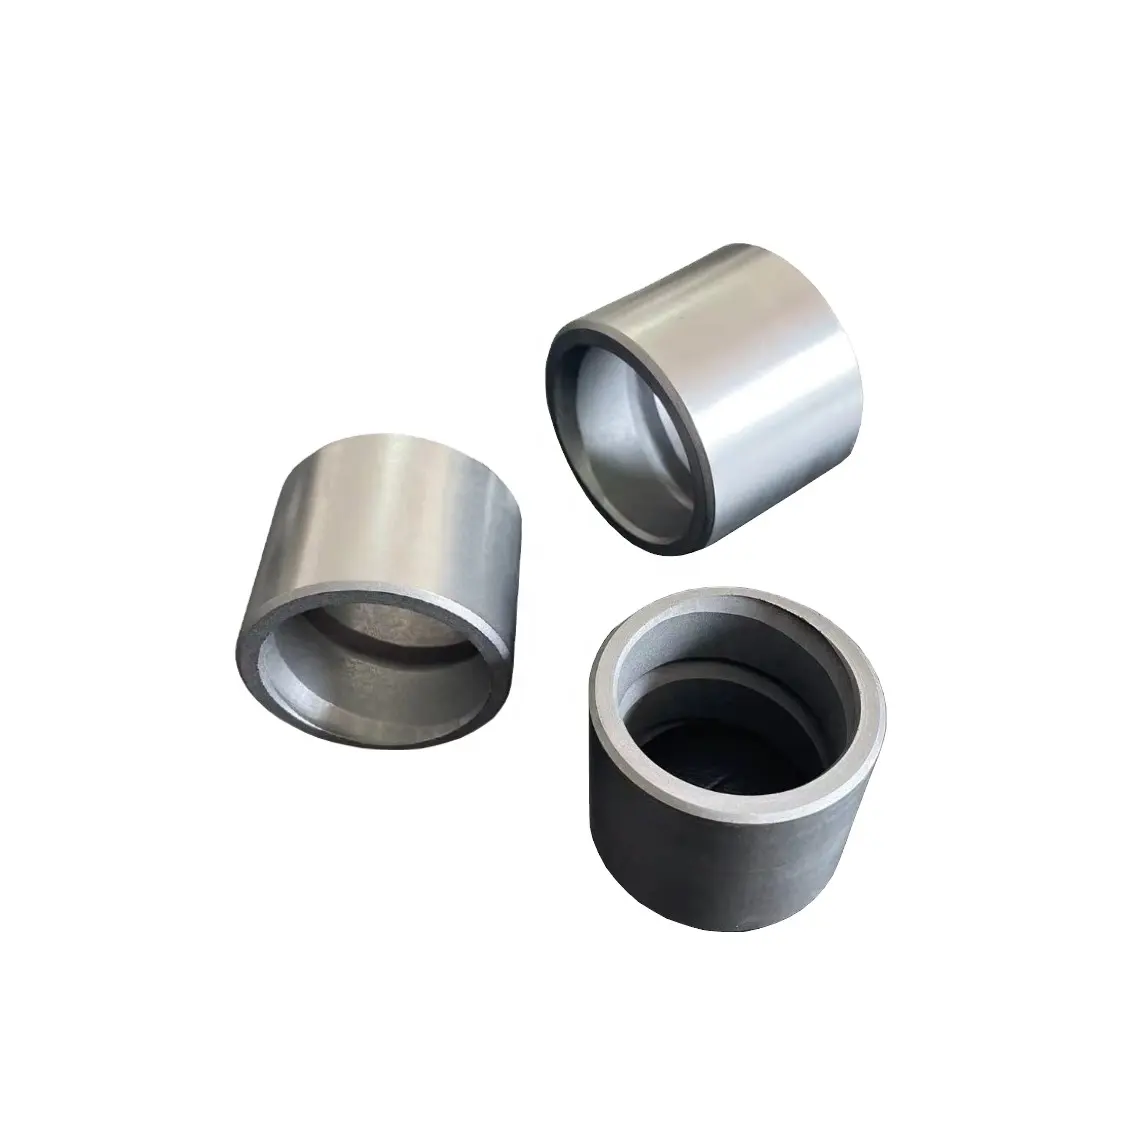 Sliding Oilless Self Lubricant Copper Linear Bush Bearing Sleeve Solid Graphite Bushes Bronze Inlaid Bushing